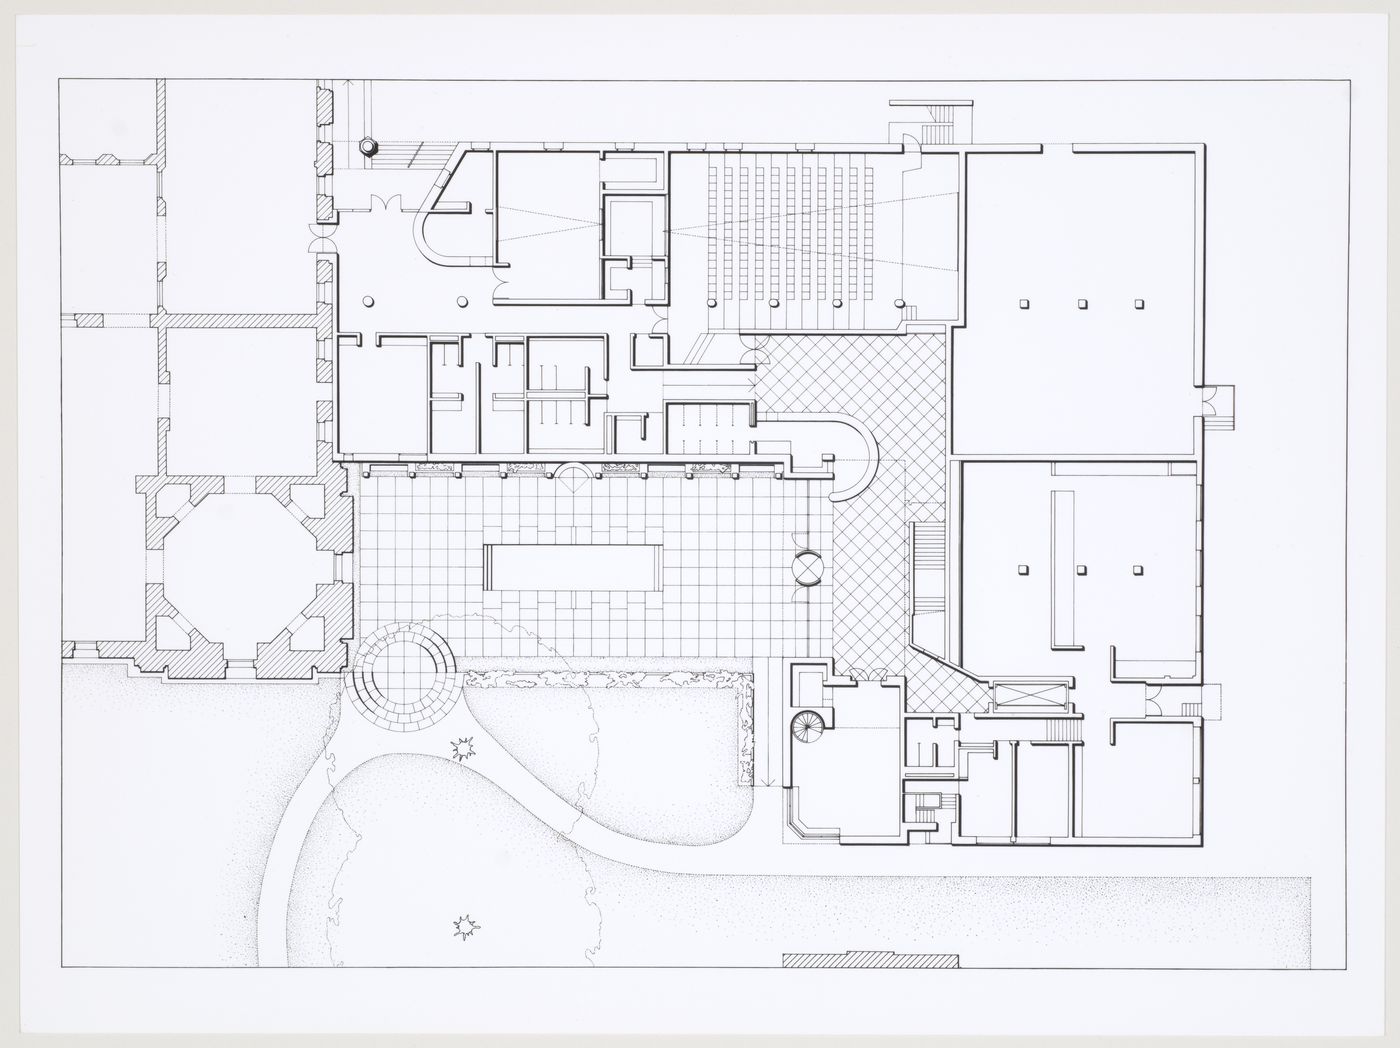 Clore Gallery, London, England: view of plan